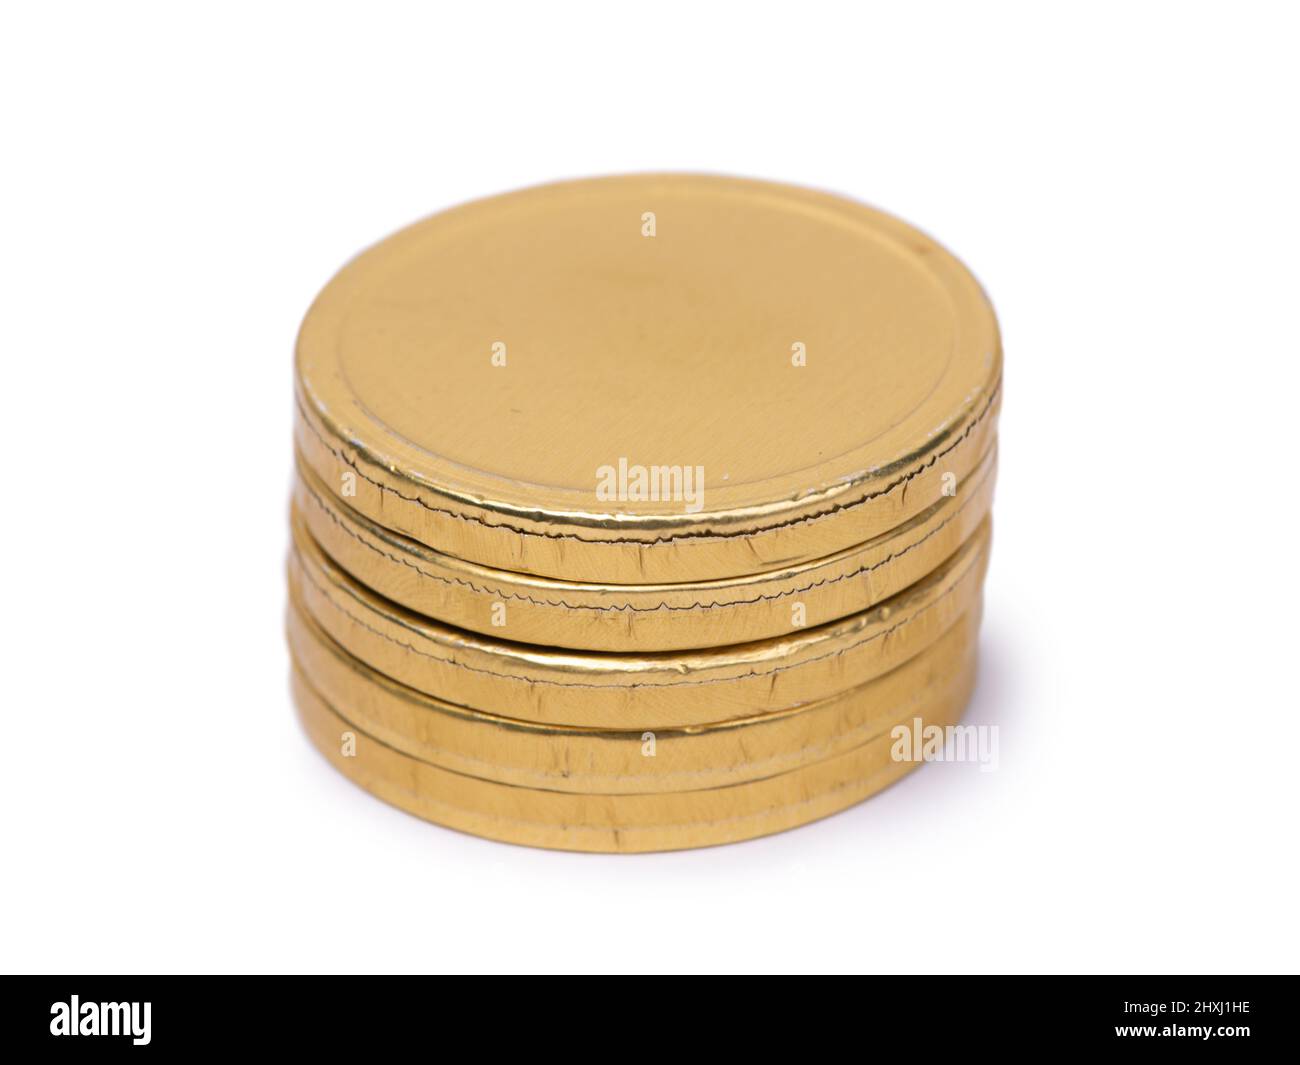 Chocolate candies in the form of coins in golden foil isolated over white background Stock Photo